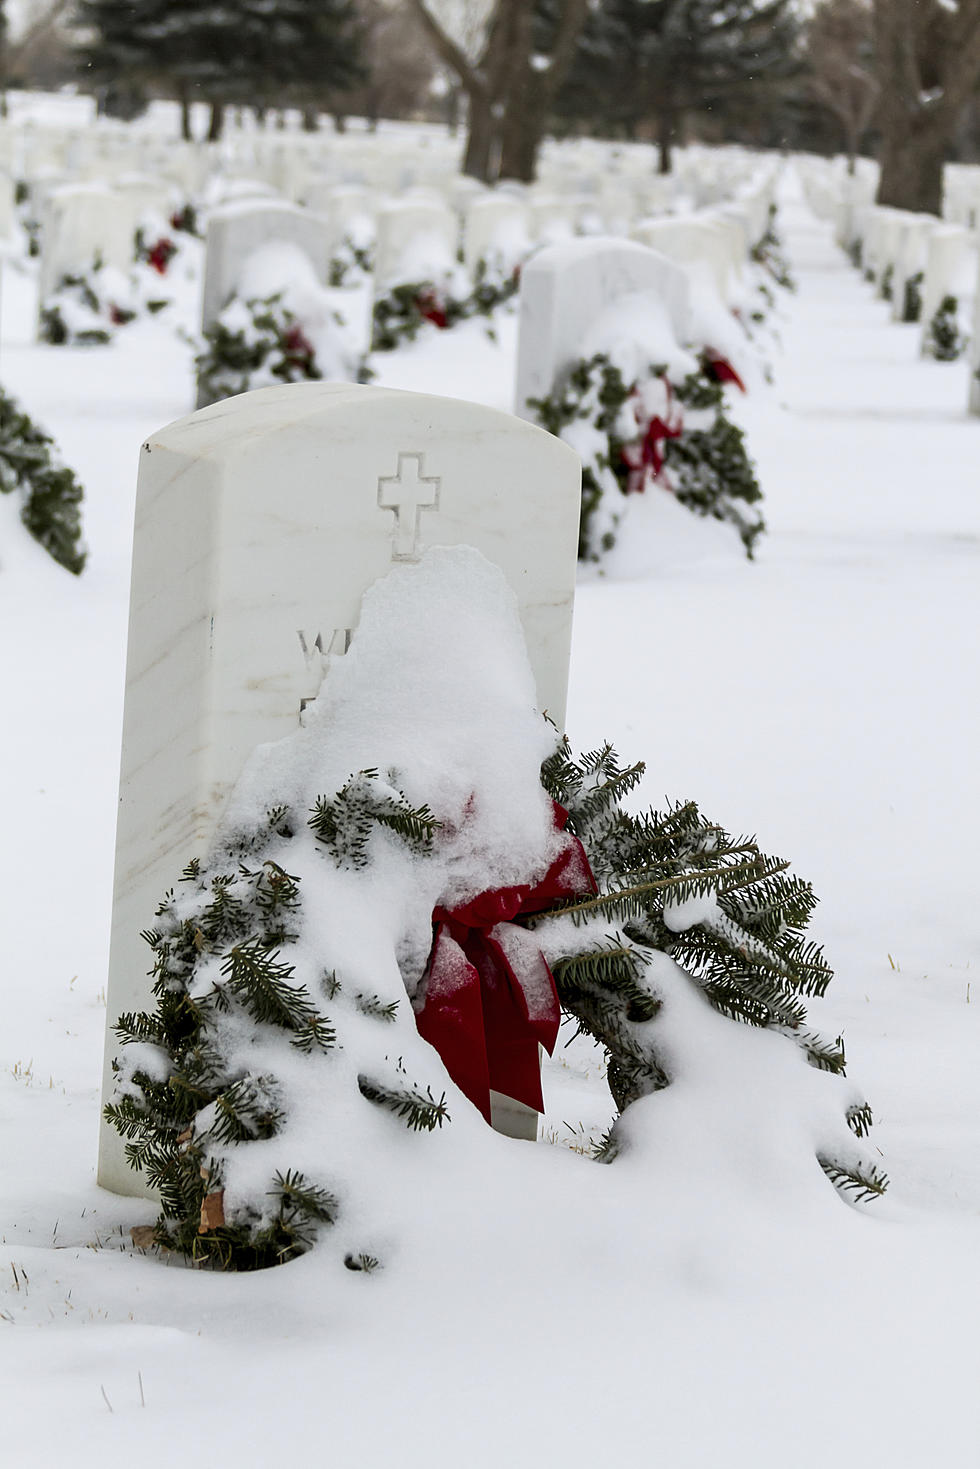 Wreaths Across America Make Stops In OOB and Kittery Today